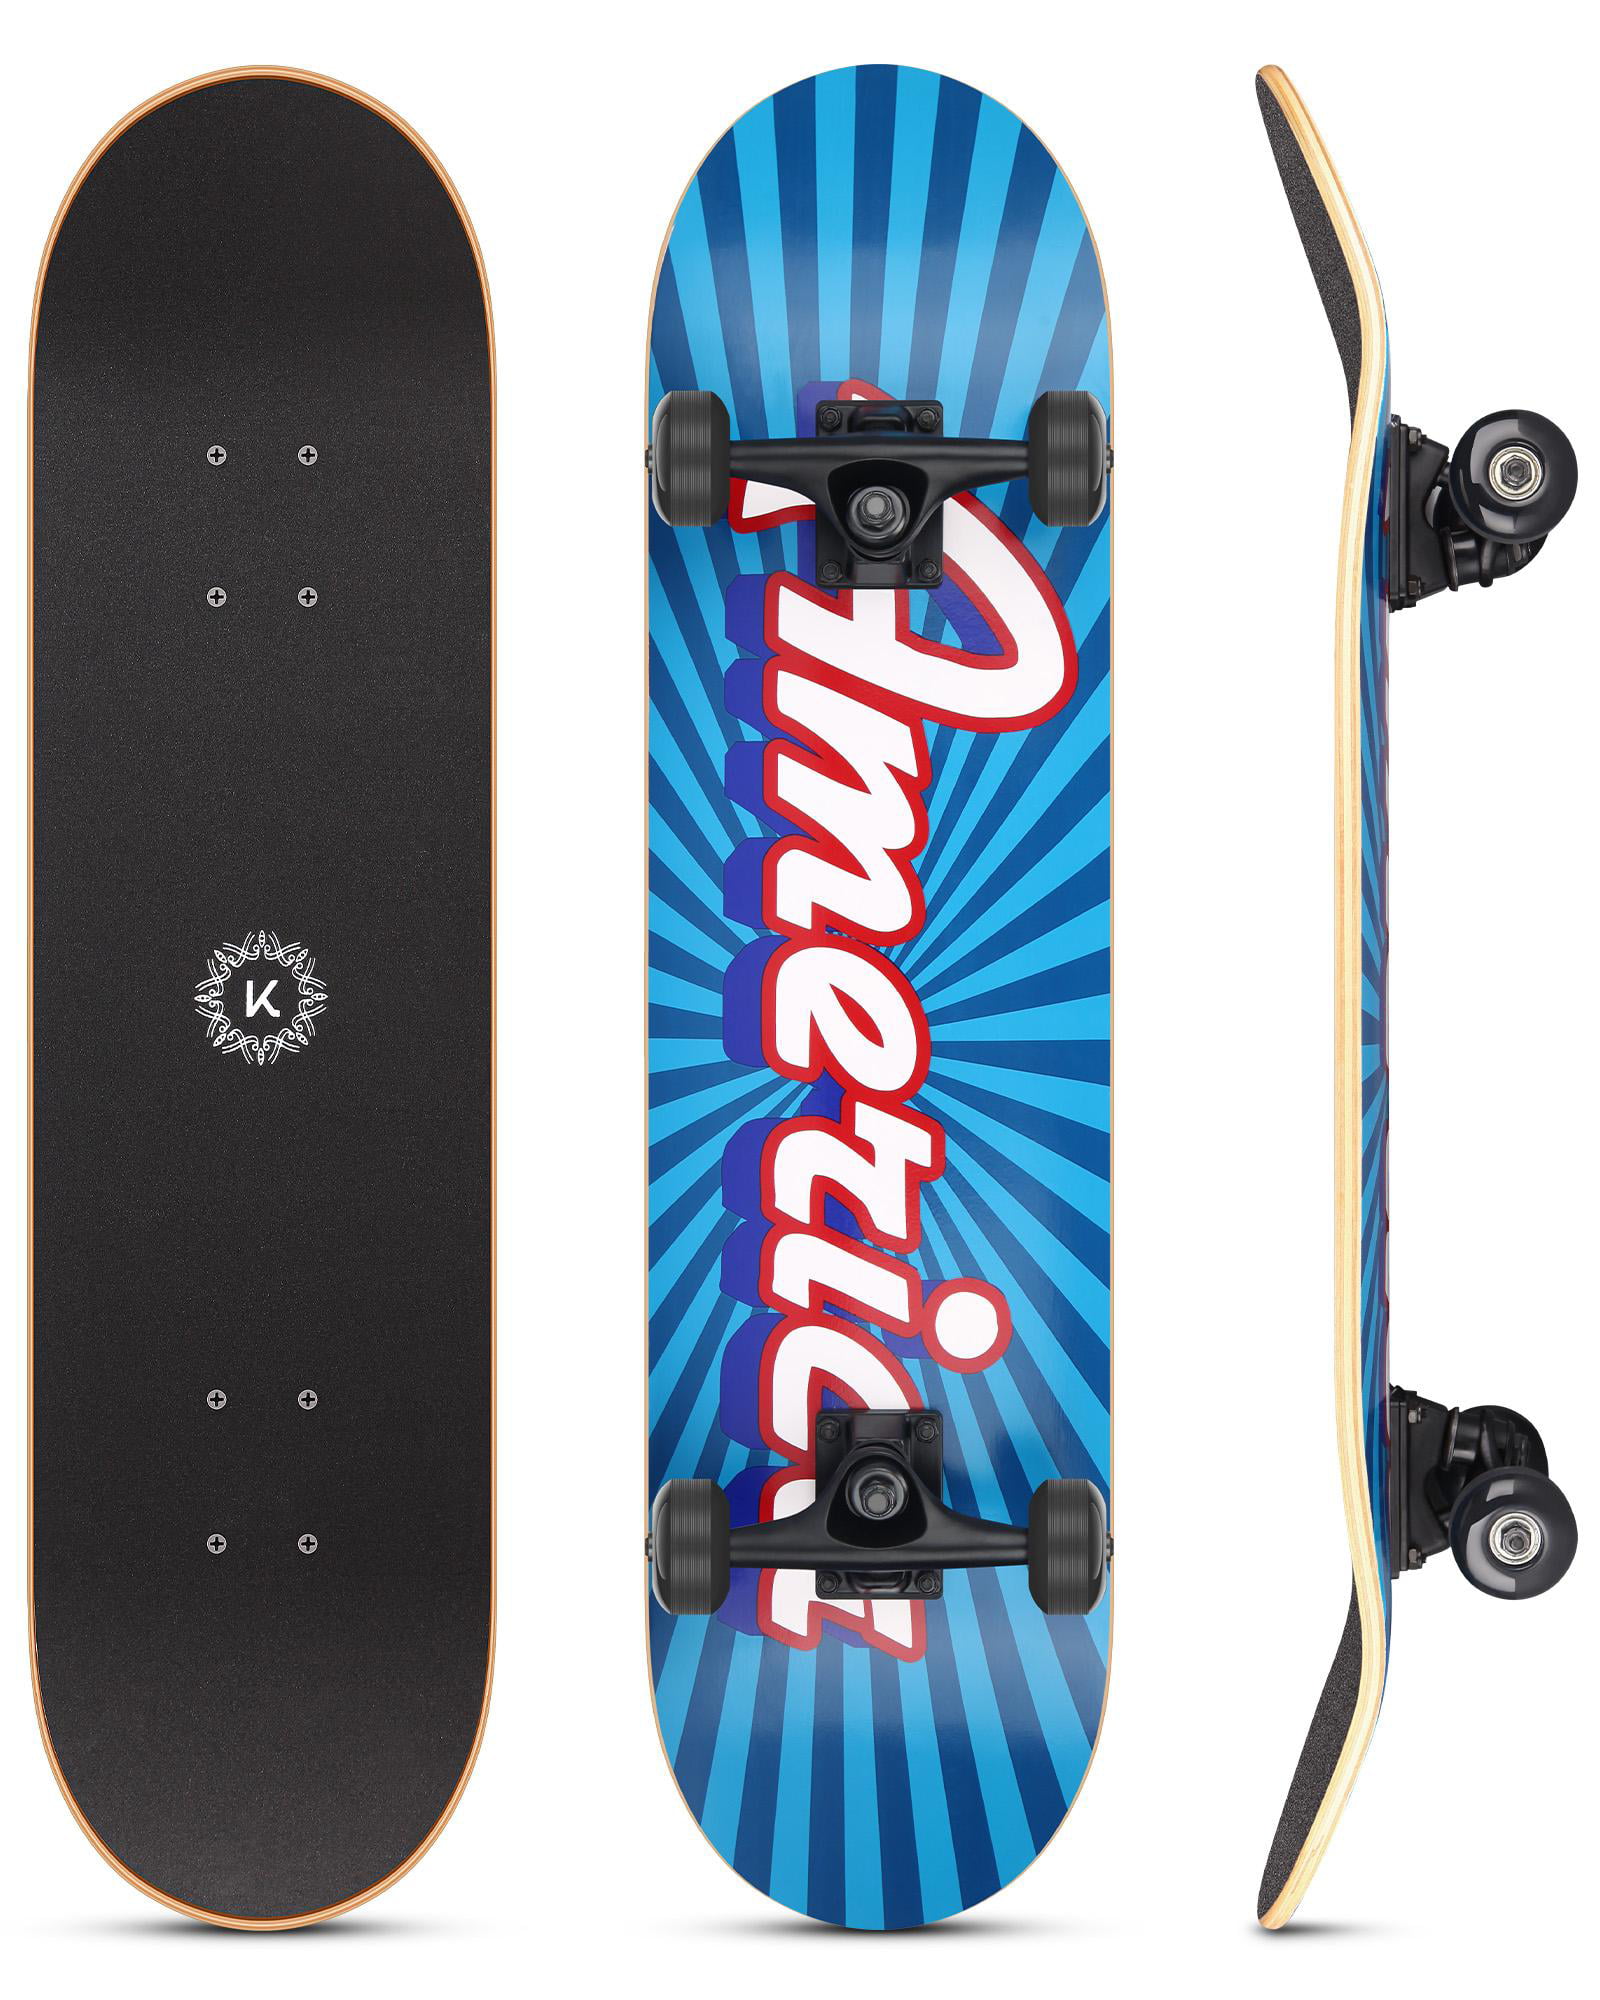 Complete Skateboard 31Inch Cruiser Skate Board Standard 9 Layer Maple Double Kick Deck For Kids Adults Beginners Teens Boys Girls ABEC-11 Bearings Concave Trick Cool Skateboards